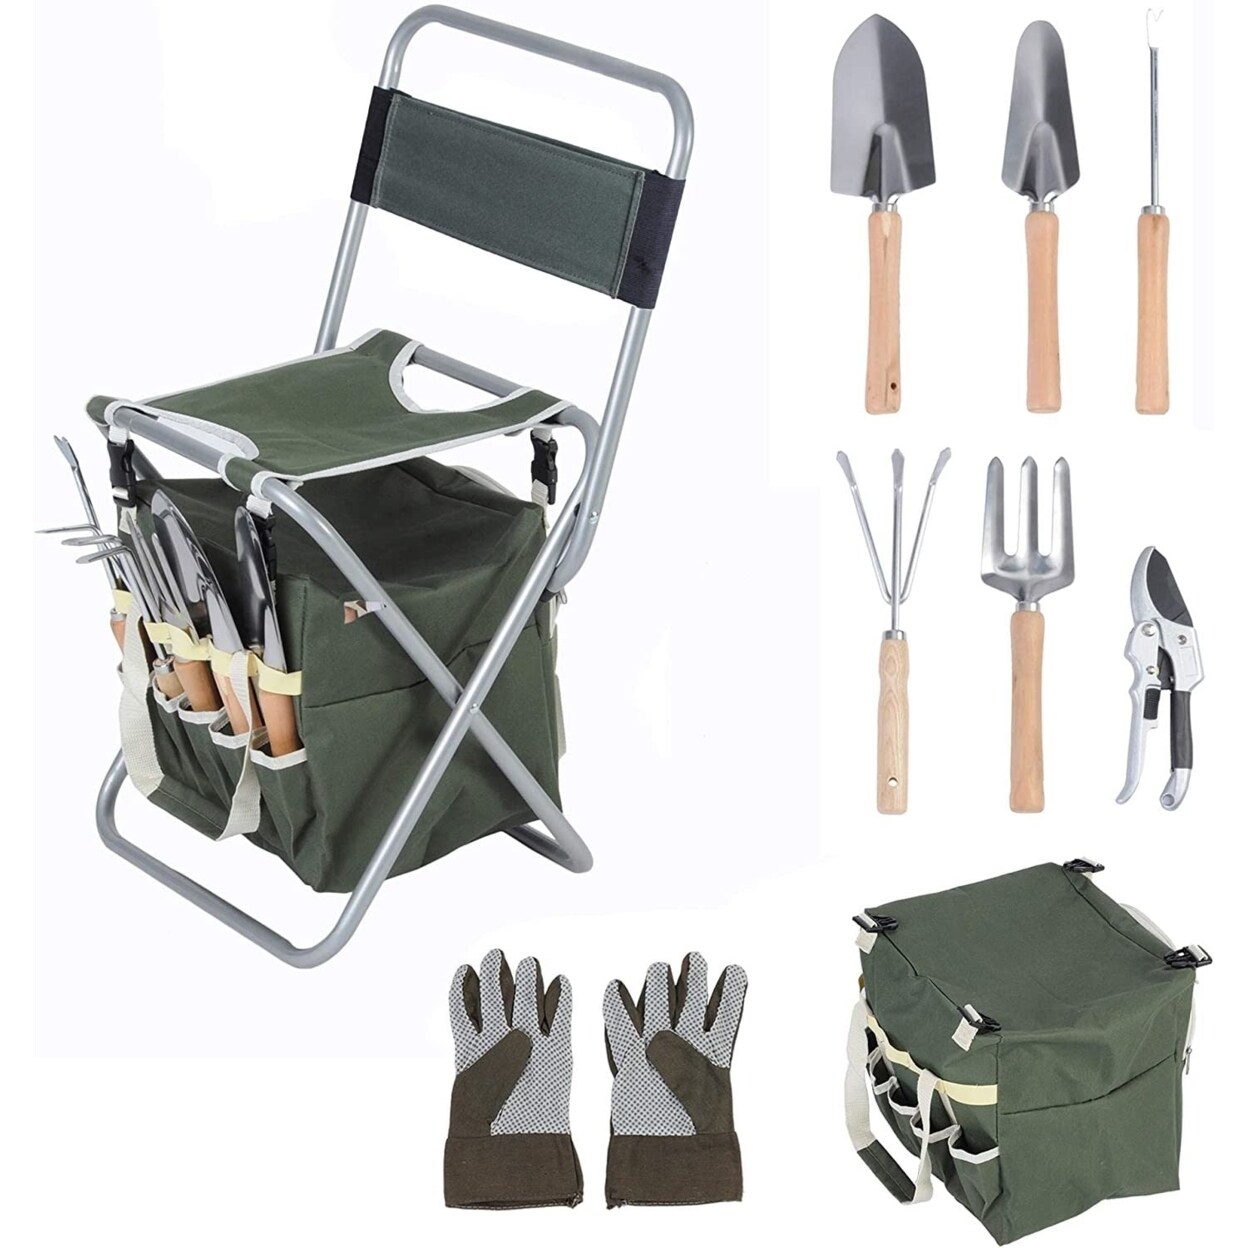 SKUSHOPS 9 PCS Garden Tools Set Ergonomic Wooden Handle Sturdy Stool with Detachable Tool Kit Perfect for Different Kinds of